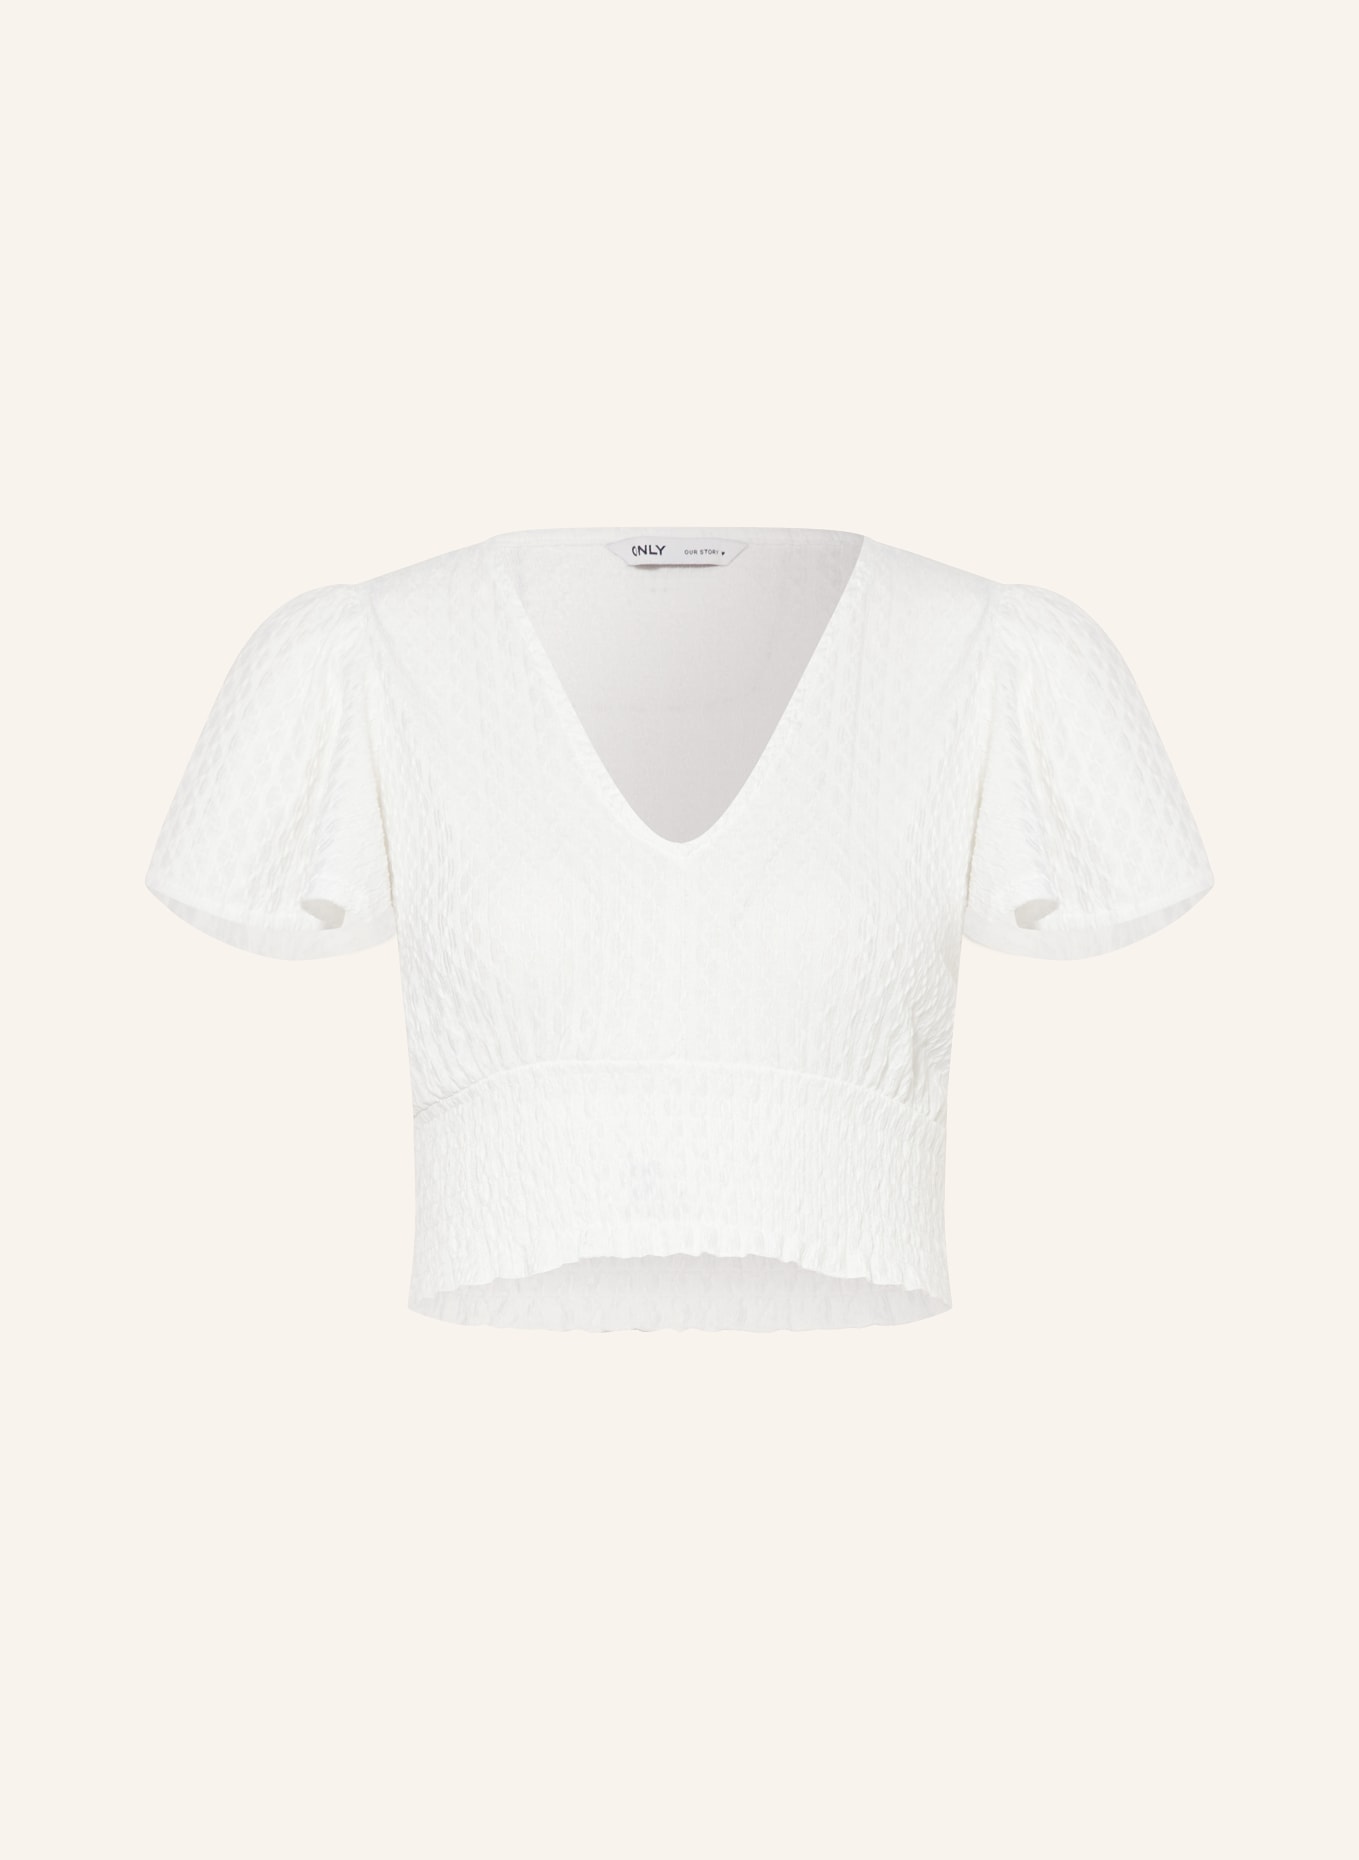 ONLY Cropped shirt blouse, Color: WHITE (Image 1)